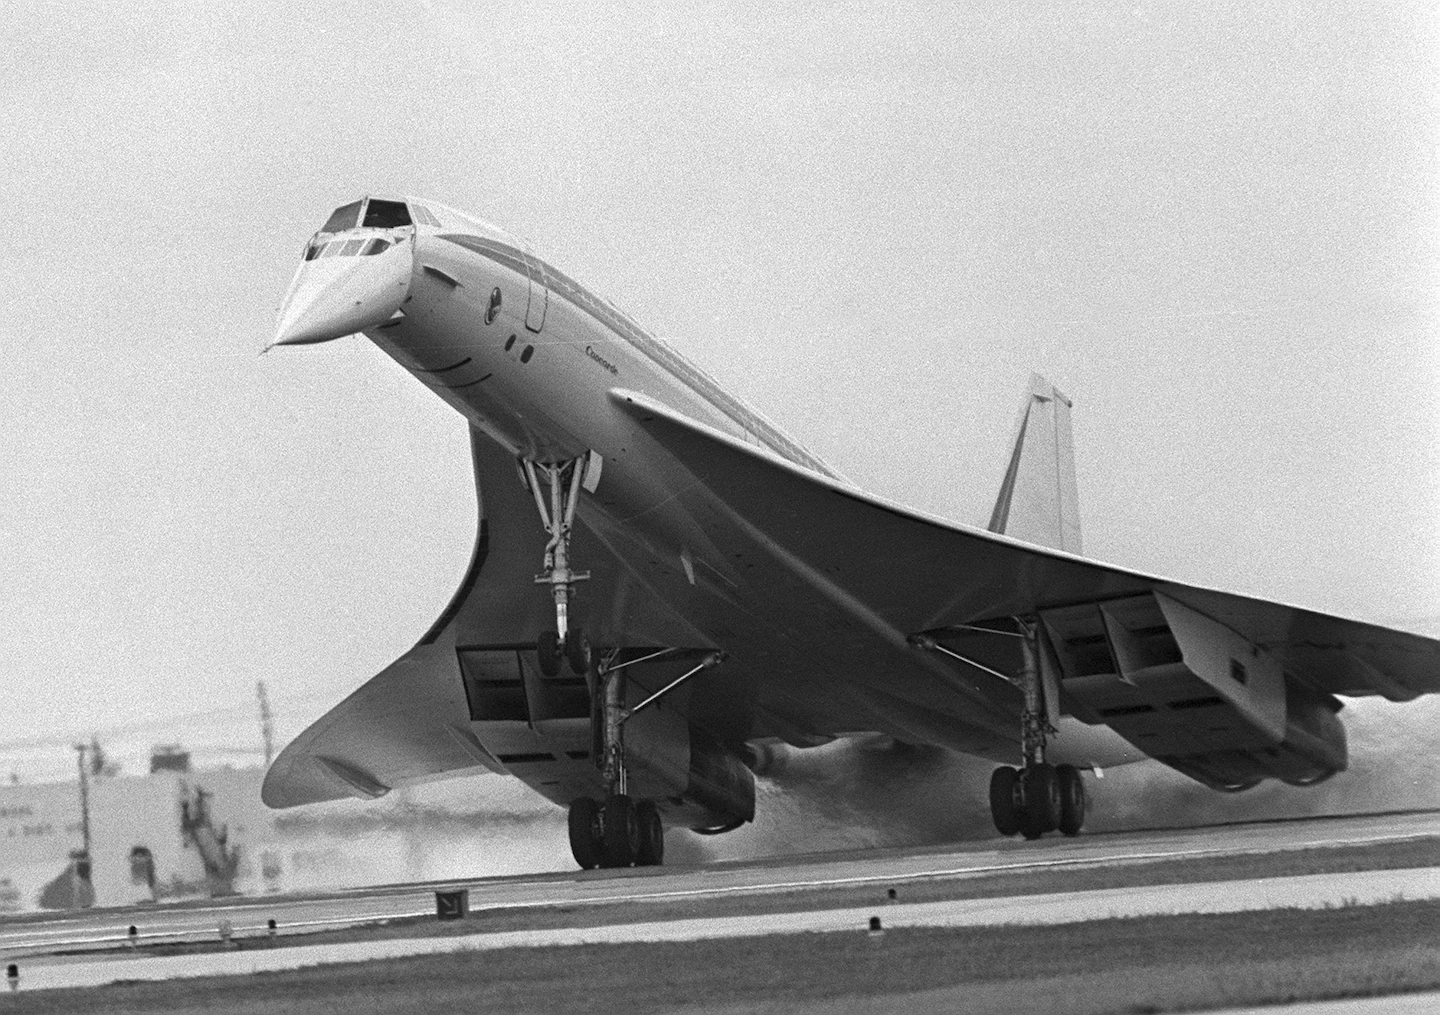 20 years after Concorde's last flight, airlines aim to restart supersonic air travel